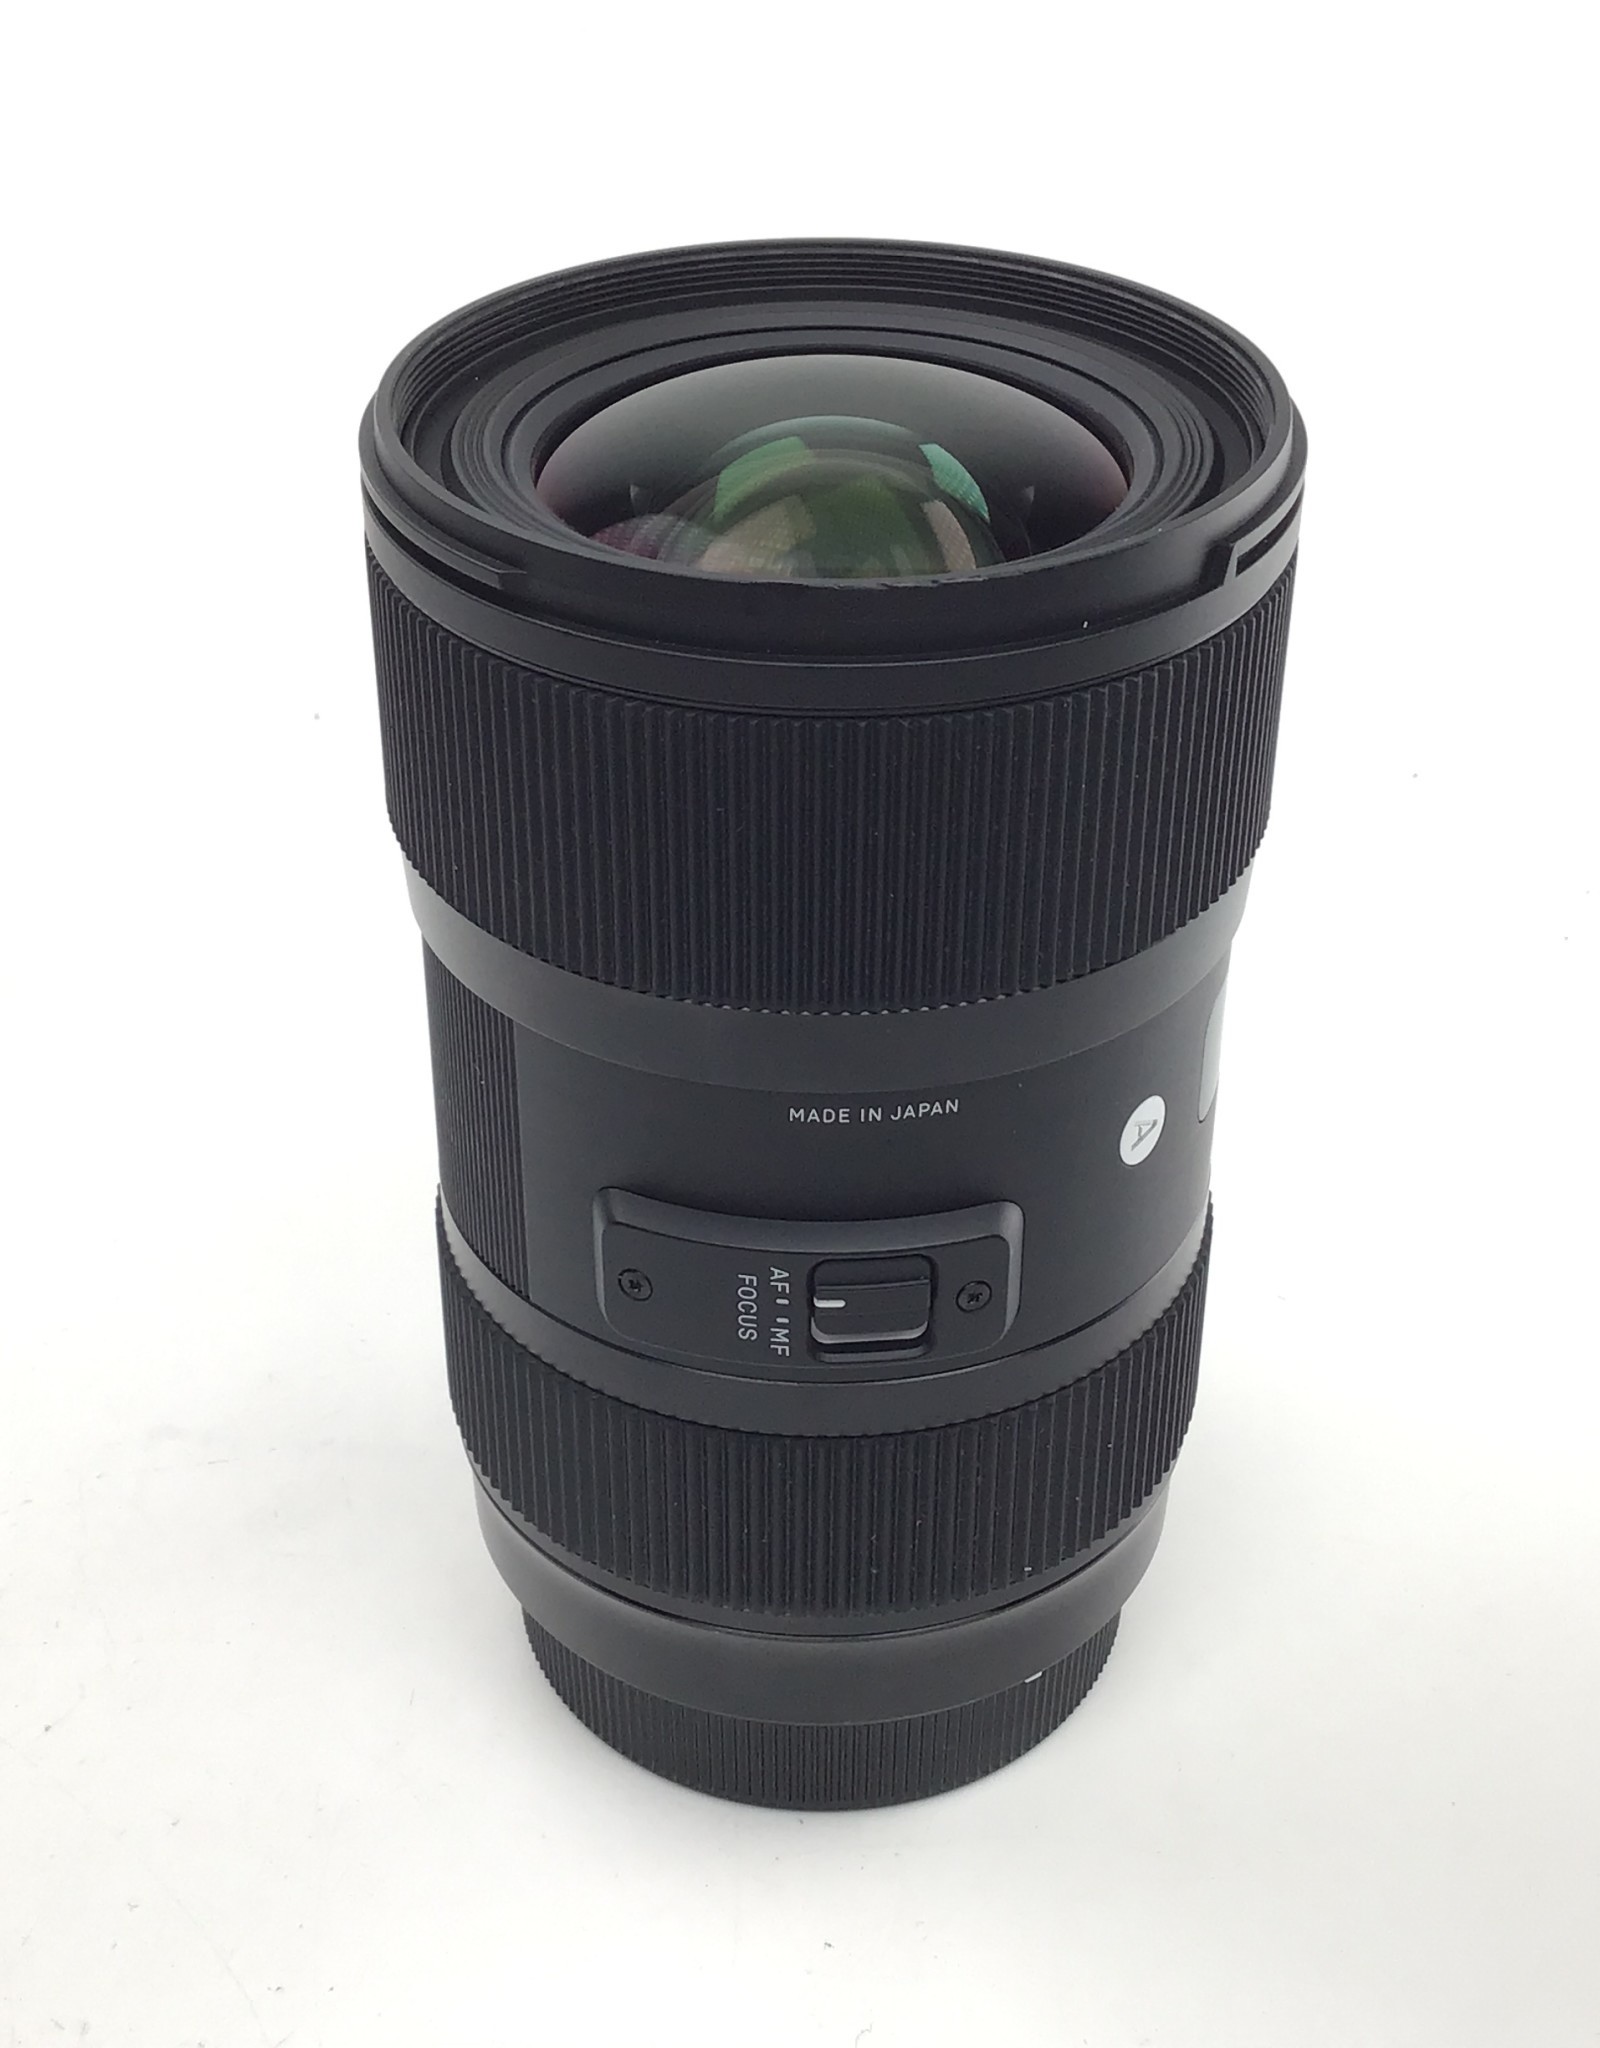 SIGMA Sigma 18-35mm f1.8 DC HSM Art Lens for Canon in Box Used EX